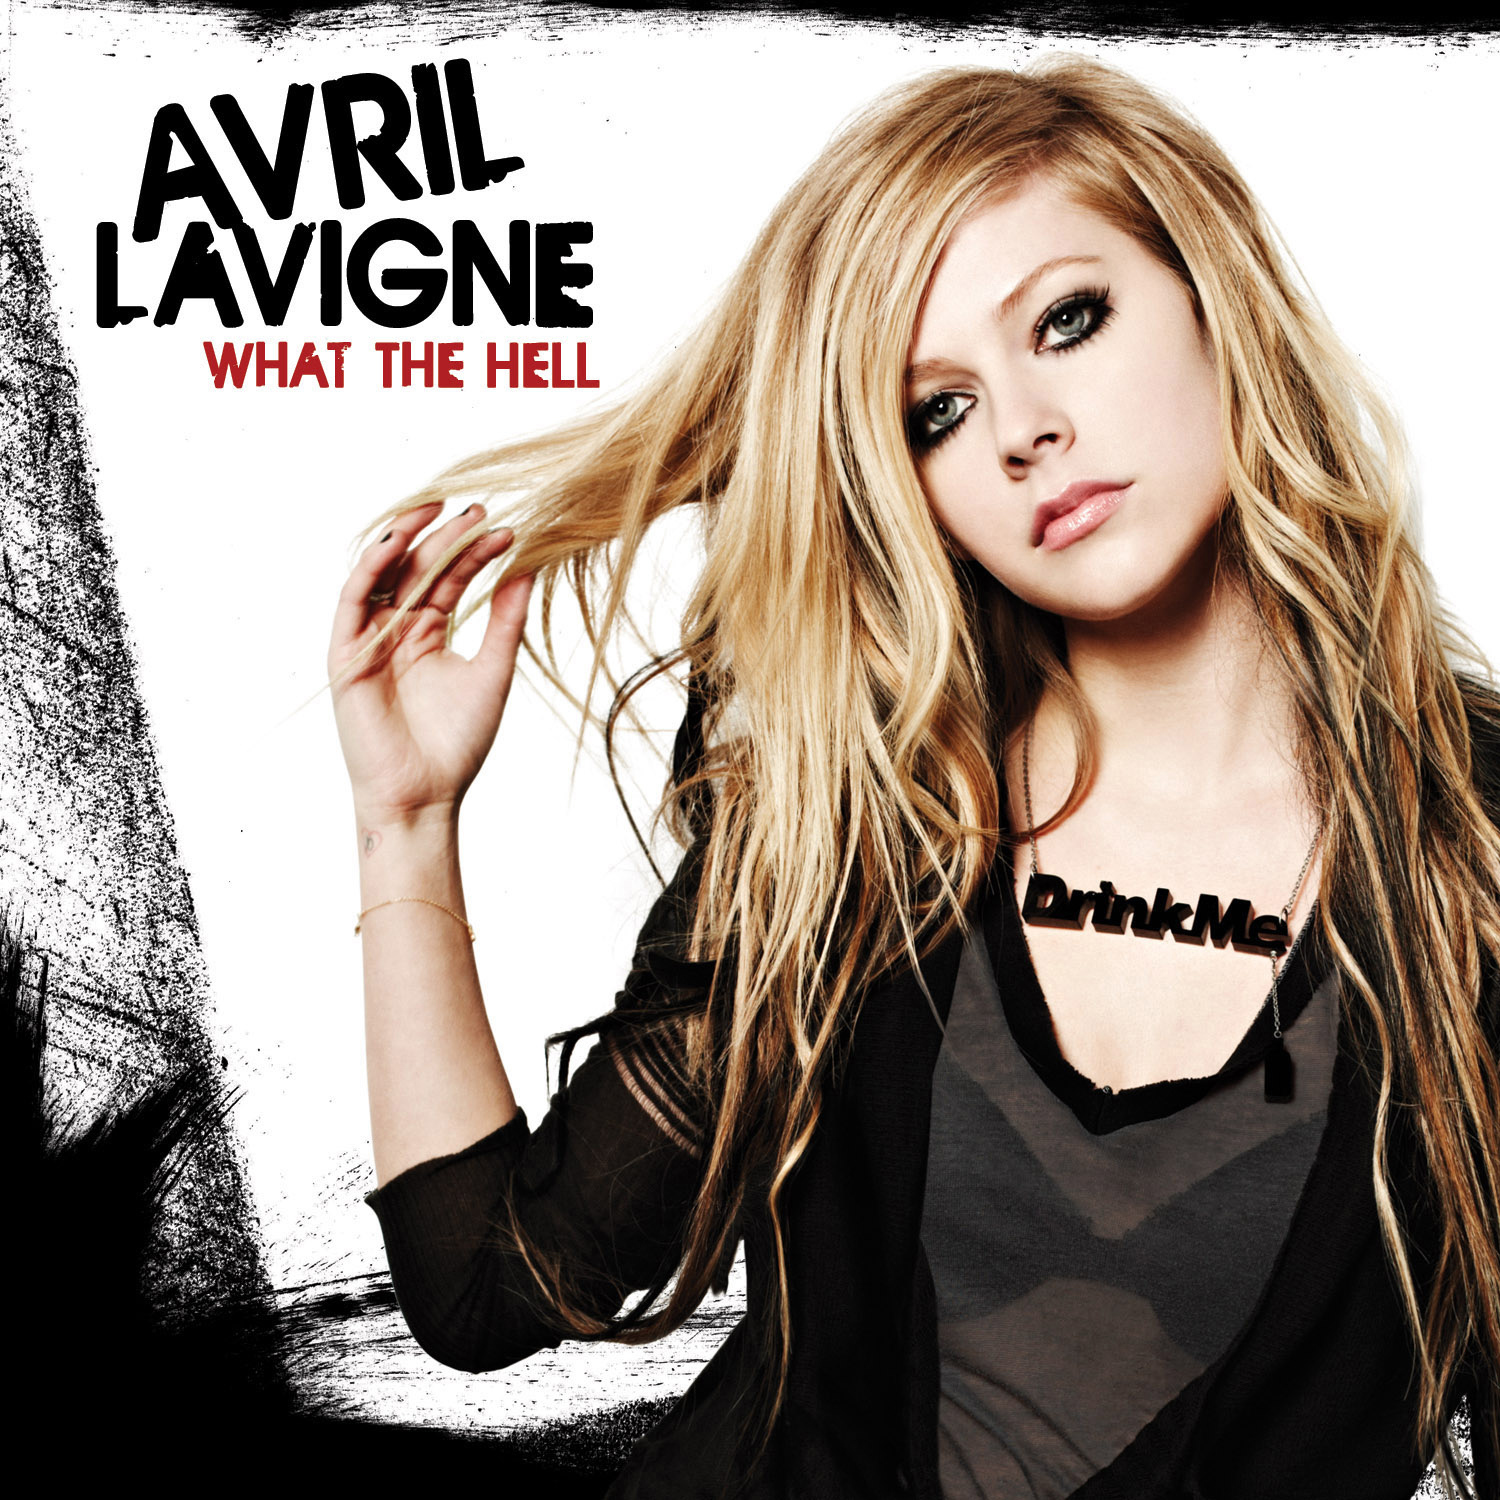 Avril Lavigne “What The Hell” Single Cover